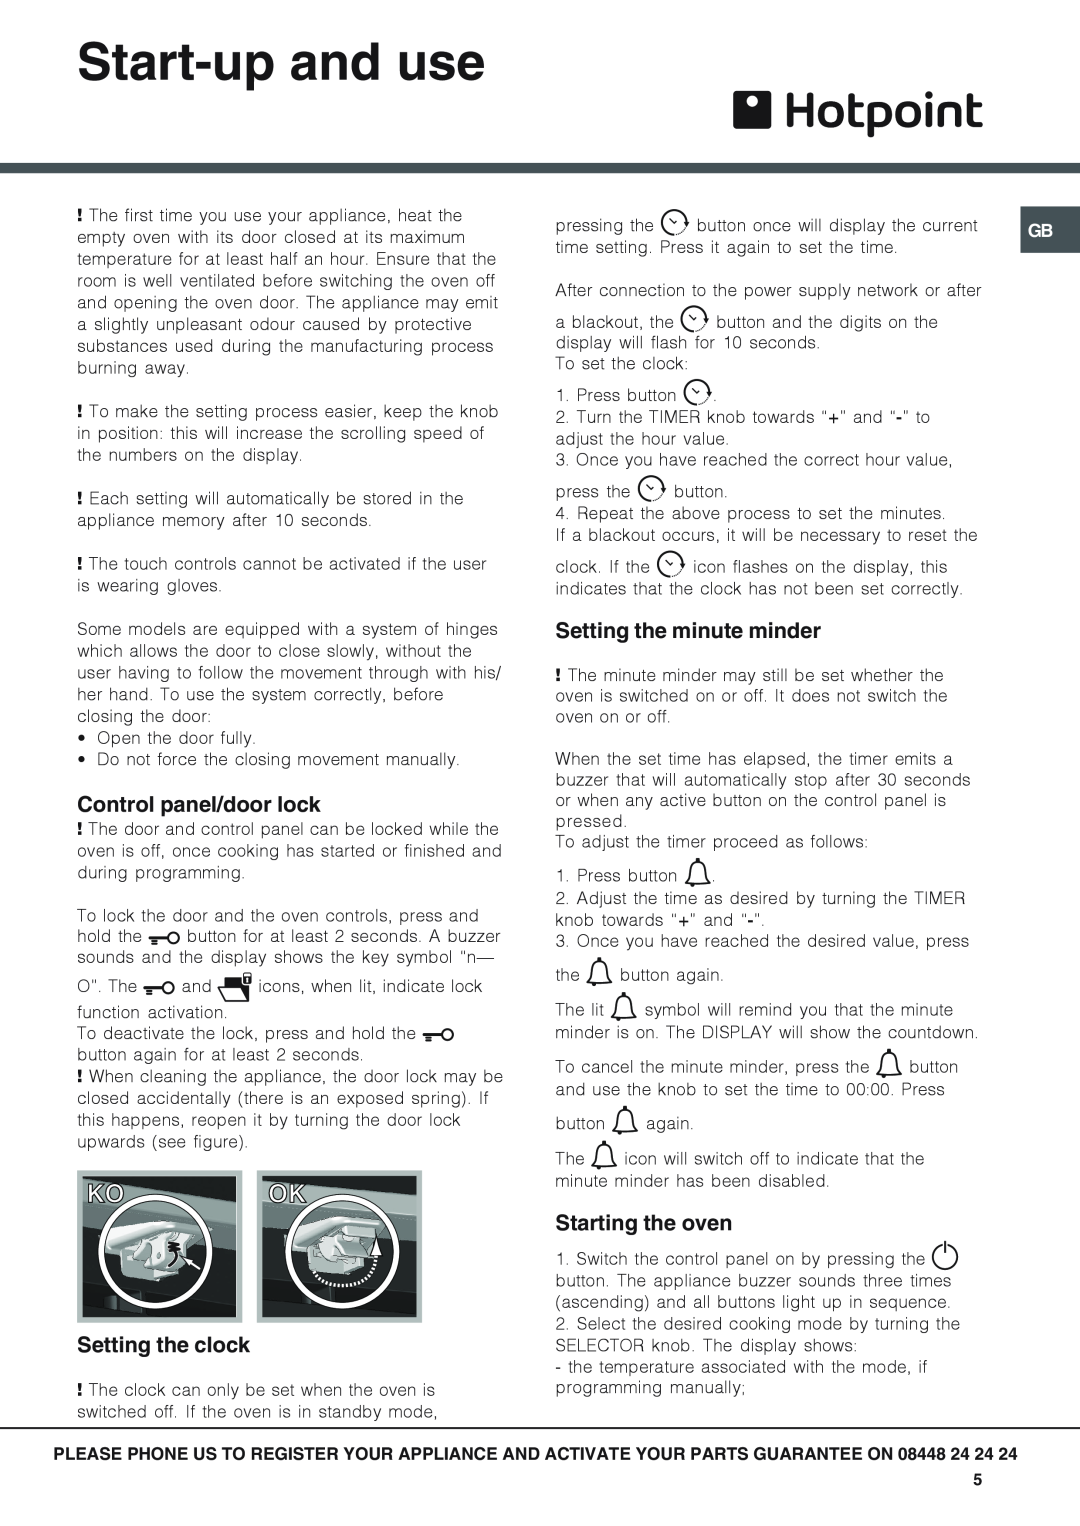 Hotpoint SX 896L PX manual Start-up and use, Control panel/door lock, Setting the clock, Setting the minute minder 